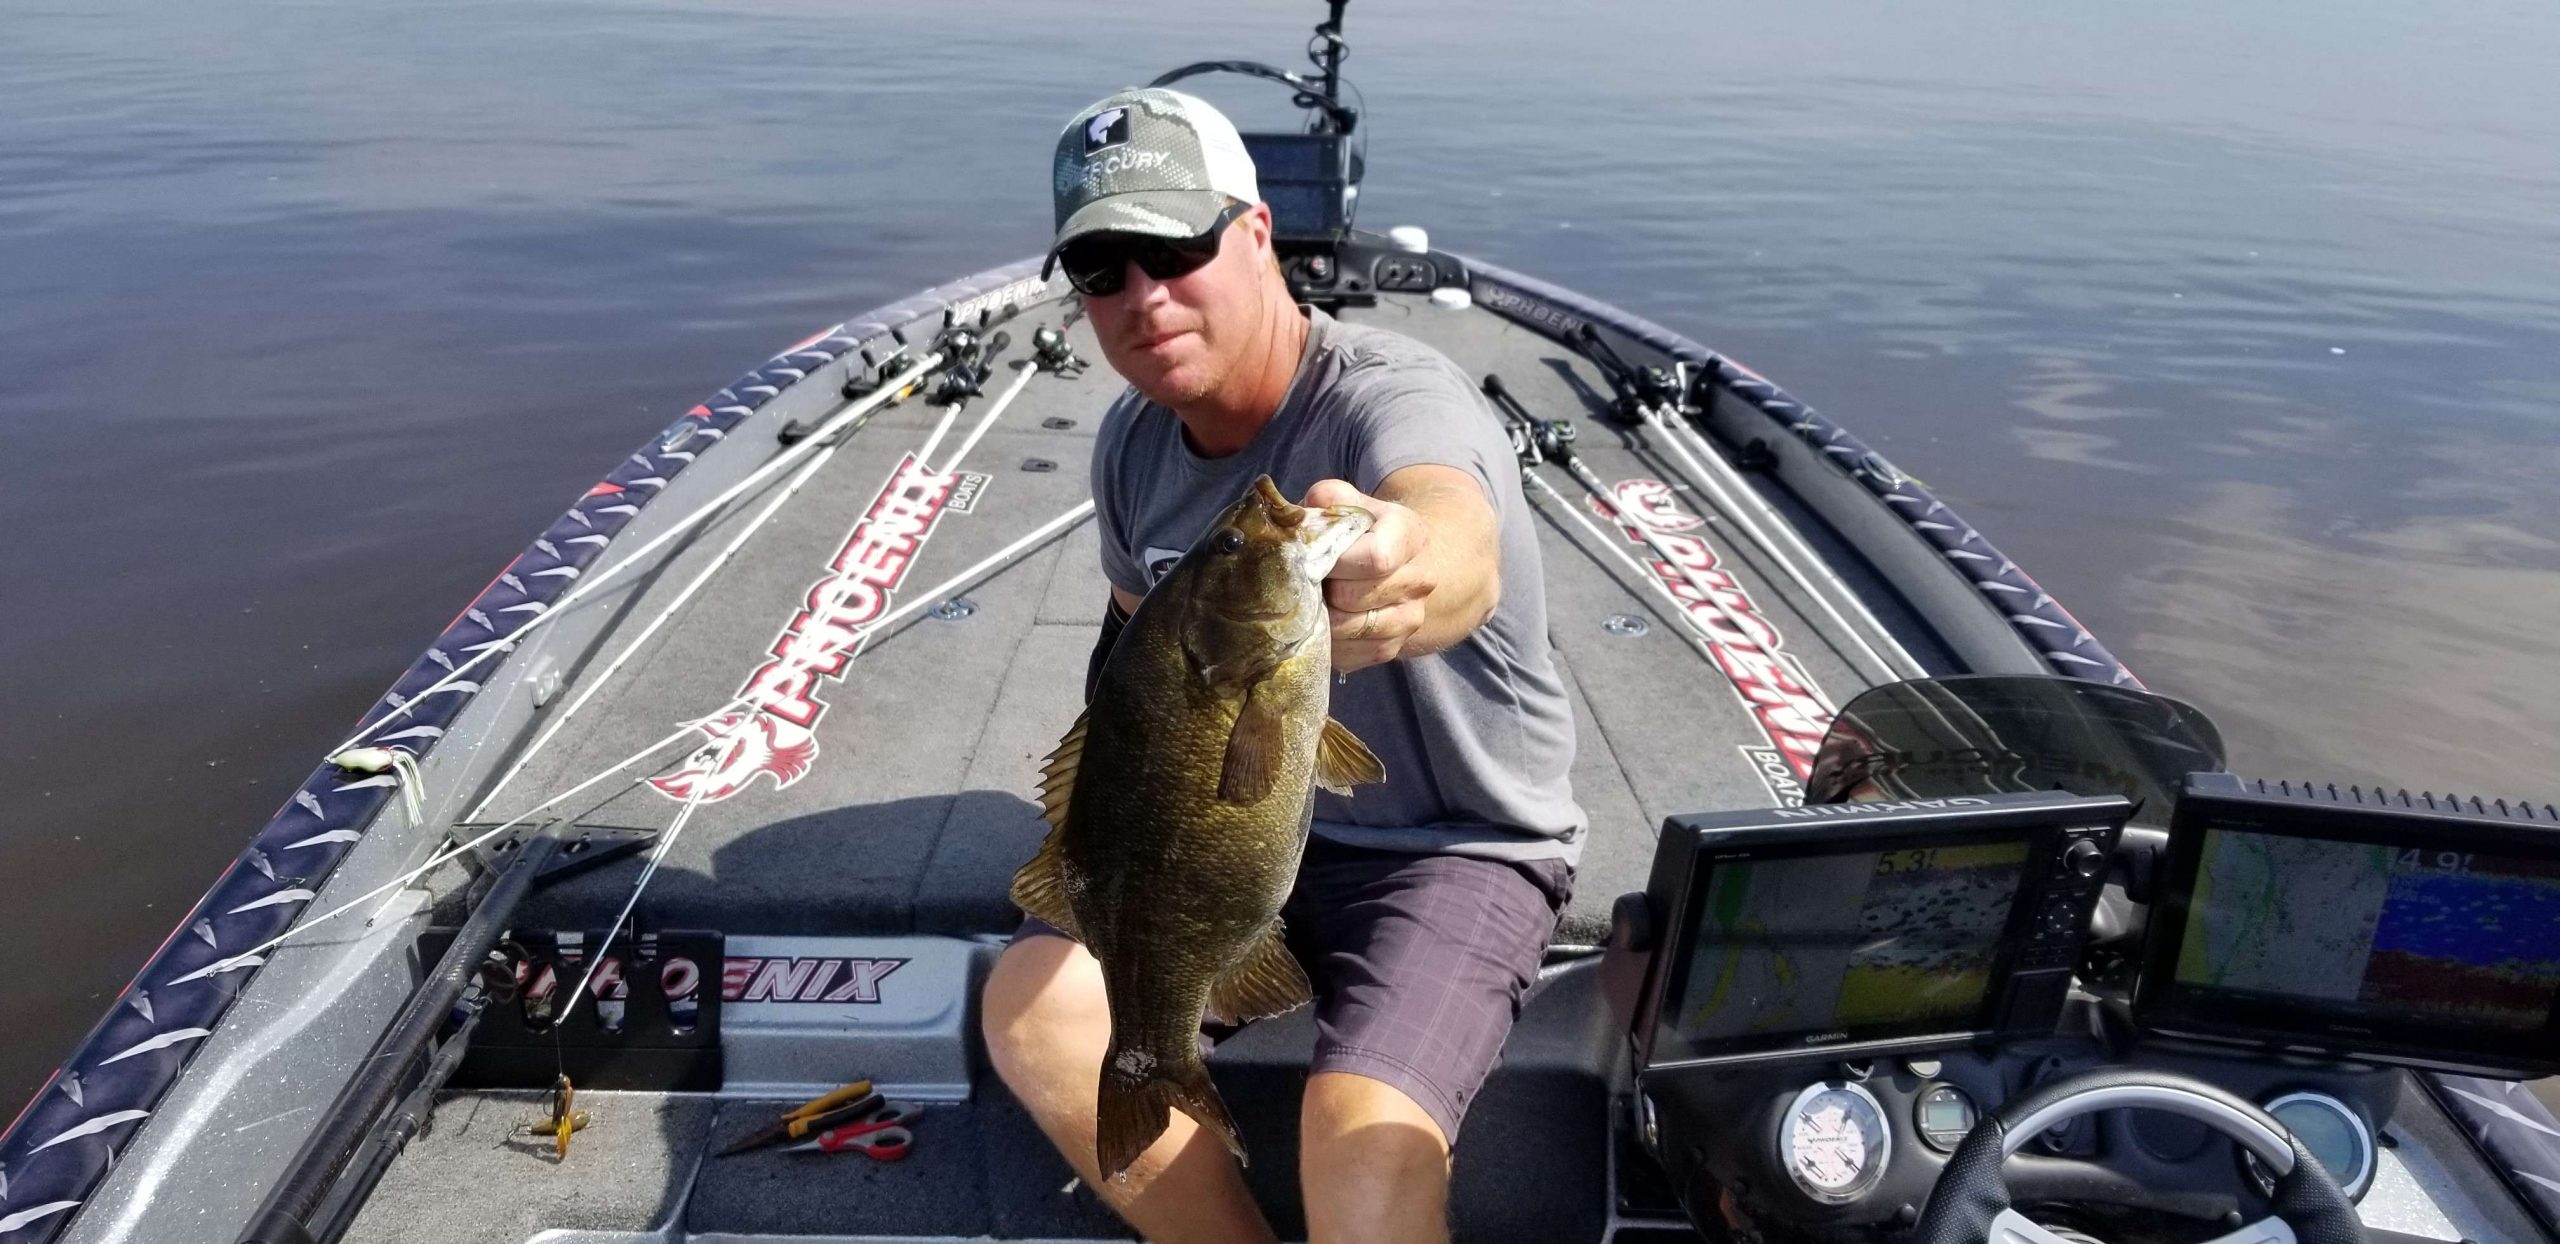 Greg just boated his fourth keeper, a nice 3-pound smallie. His first 3 pound fish of the day.